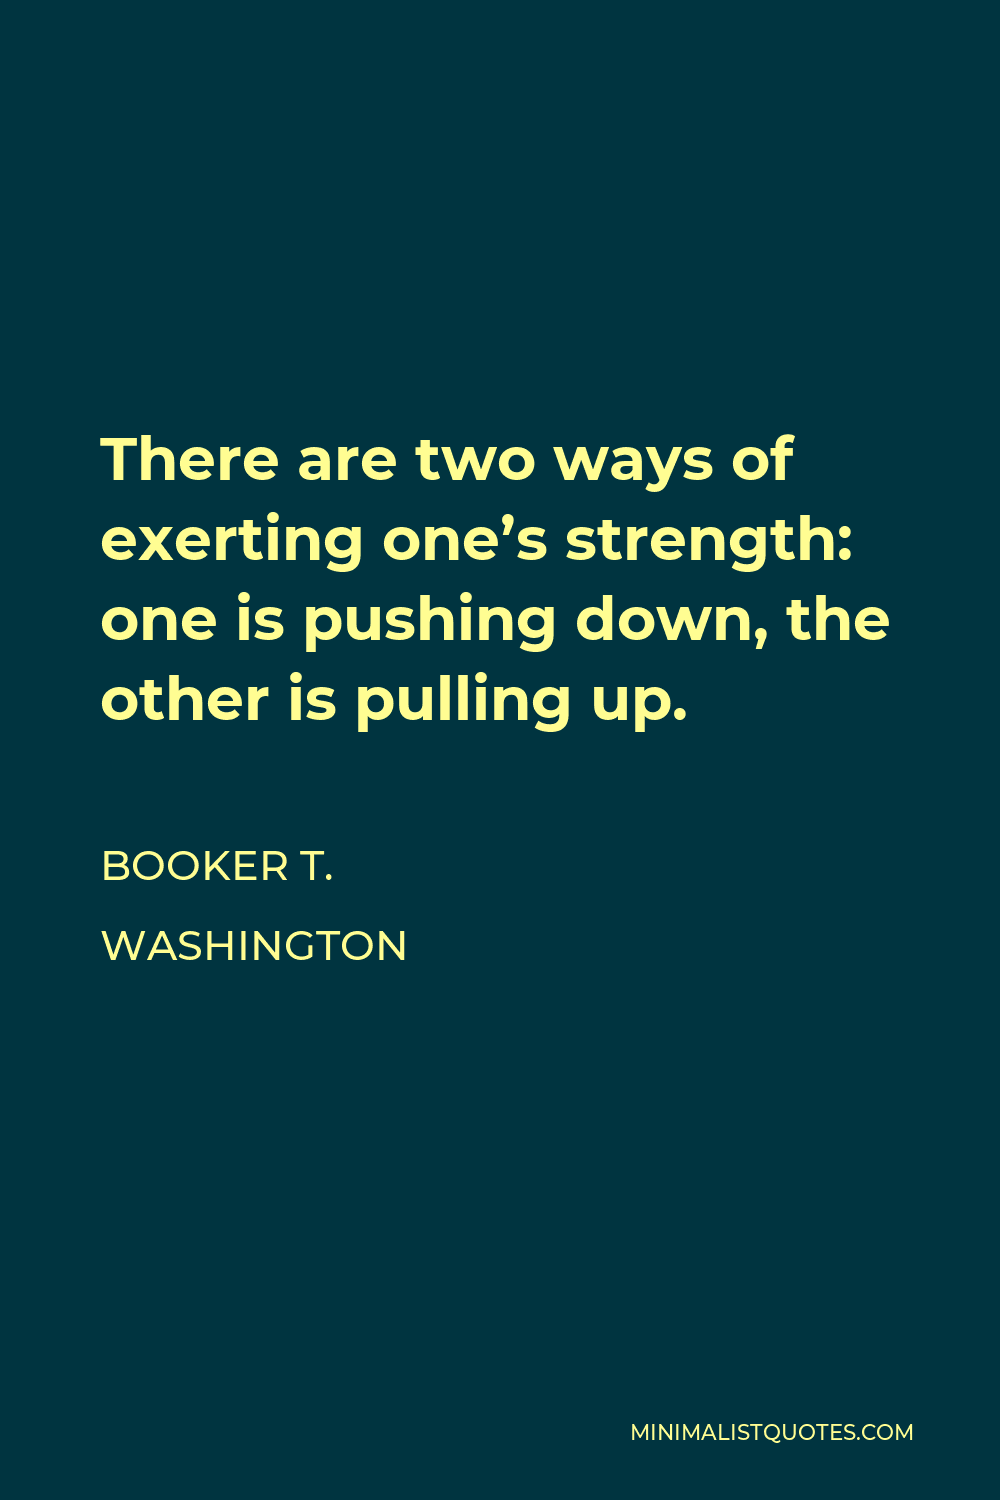 Booker T. Washington Quote - There are two ways of exerting one’s strength: one is pushing down, the other is pulling up.